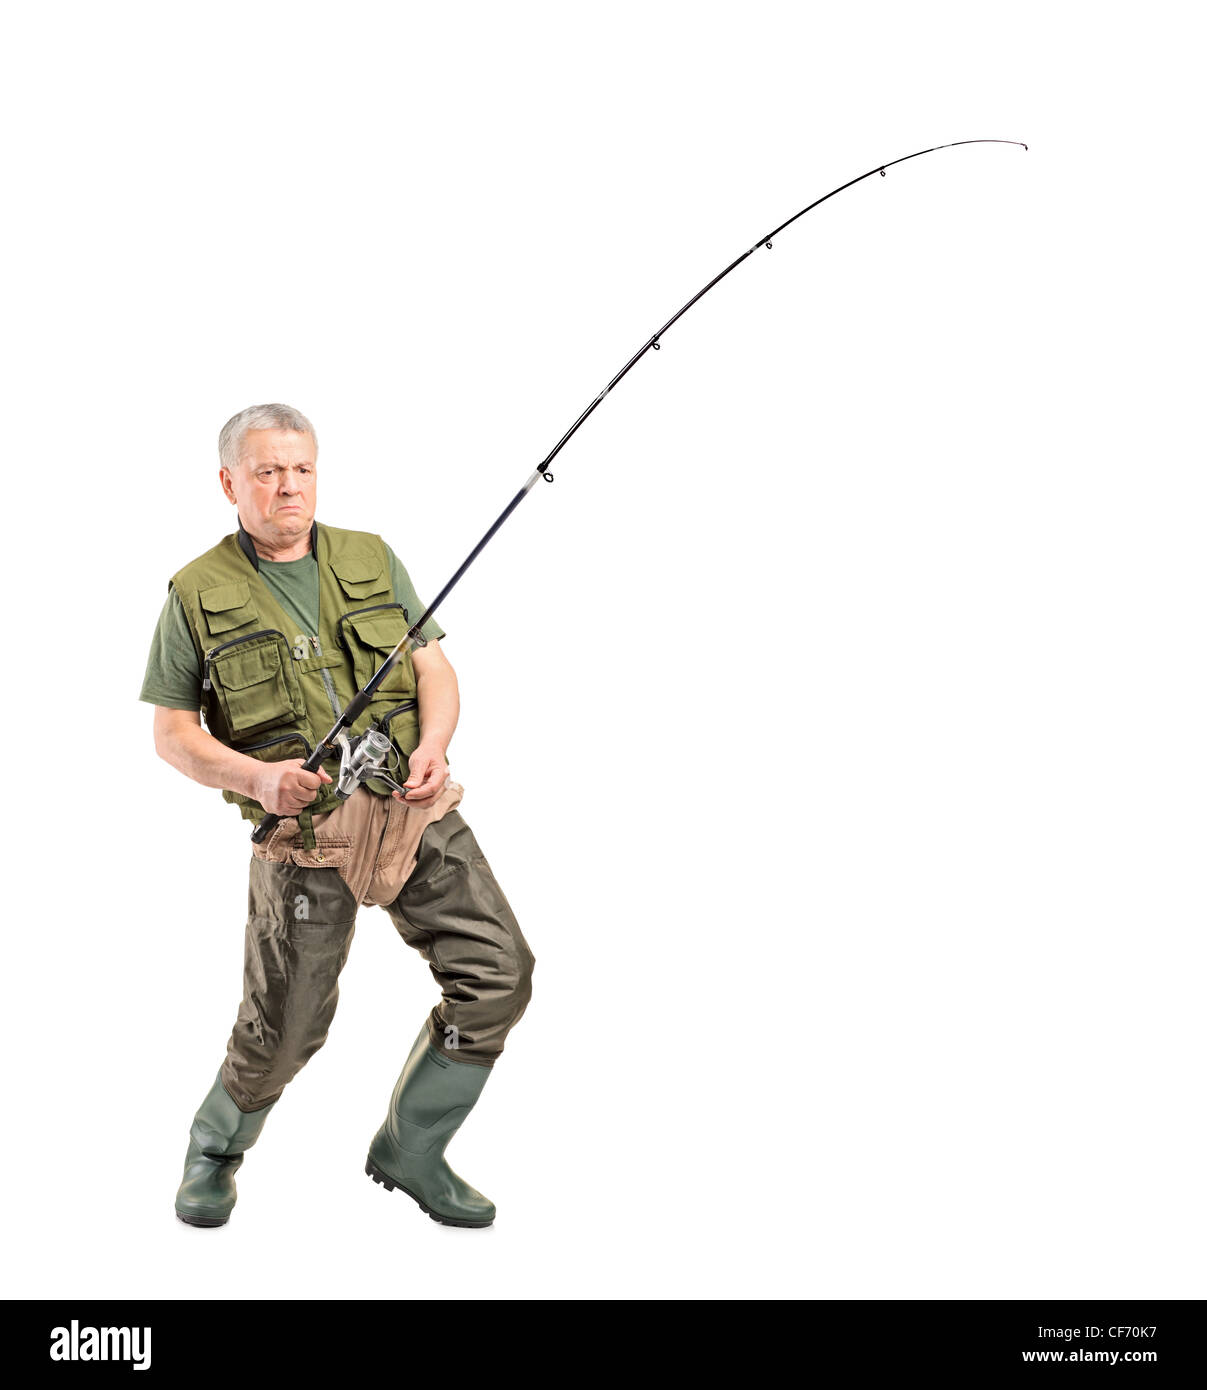 Happy Fisherman Holding Many Fish on a Hook Stock Photo - Image of adult,  mature: 219897938